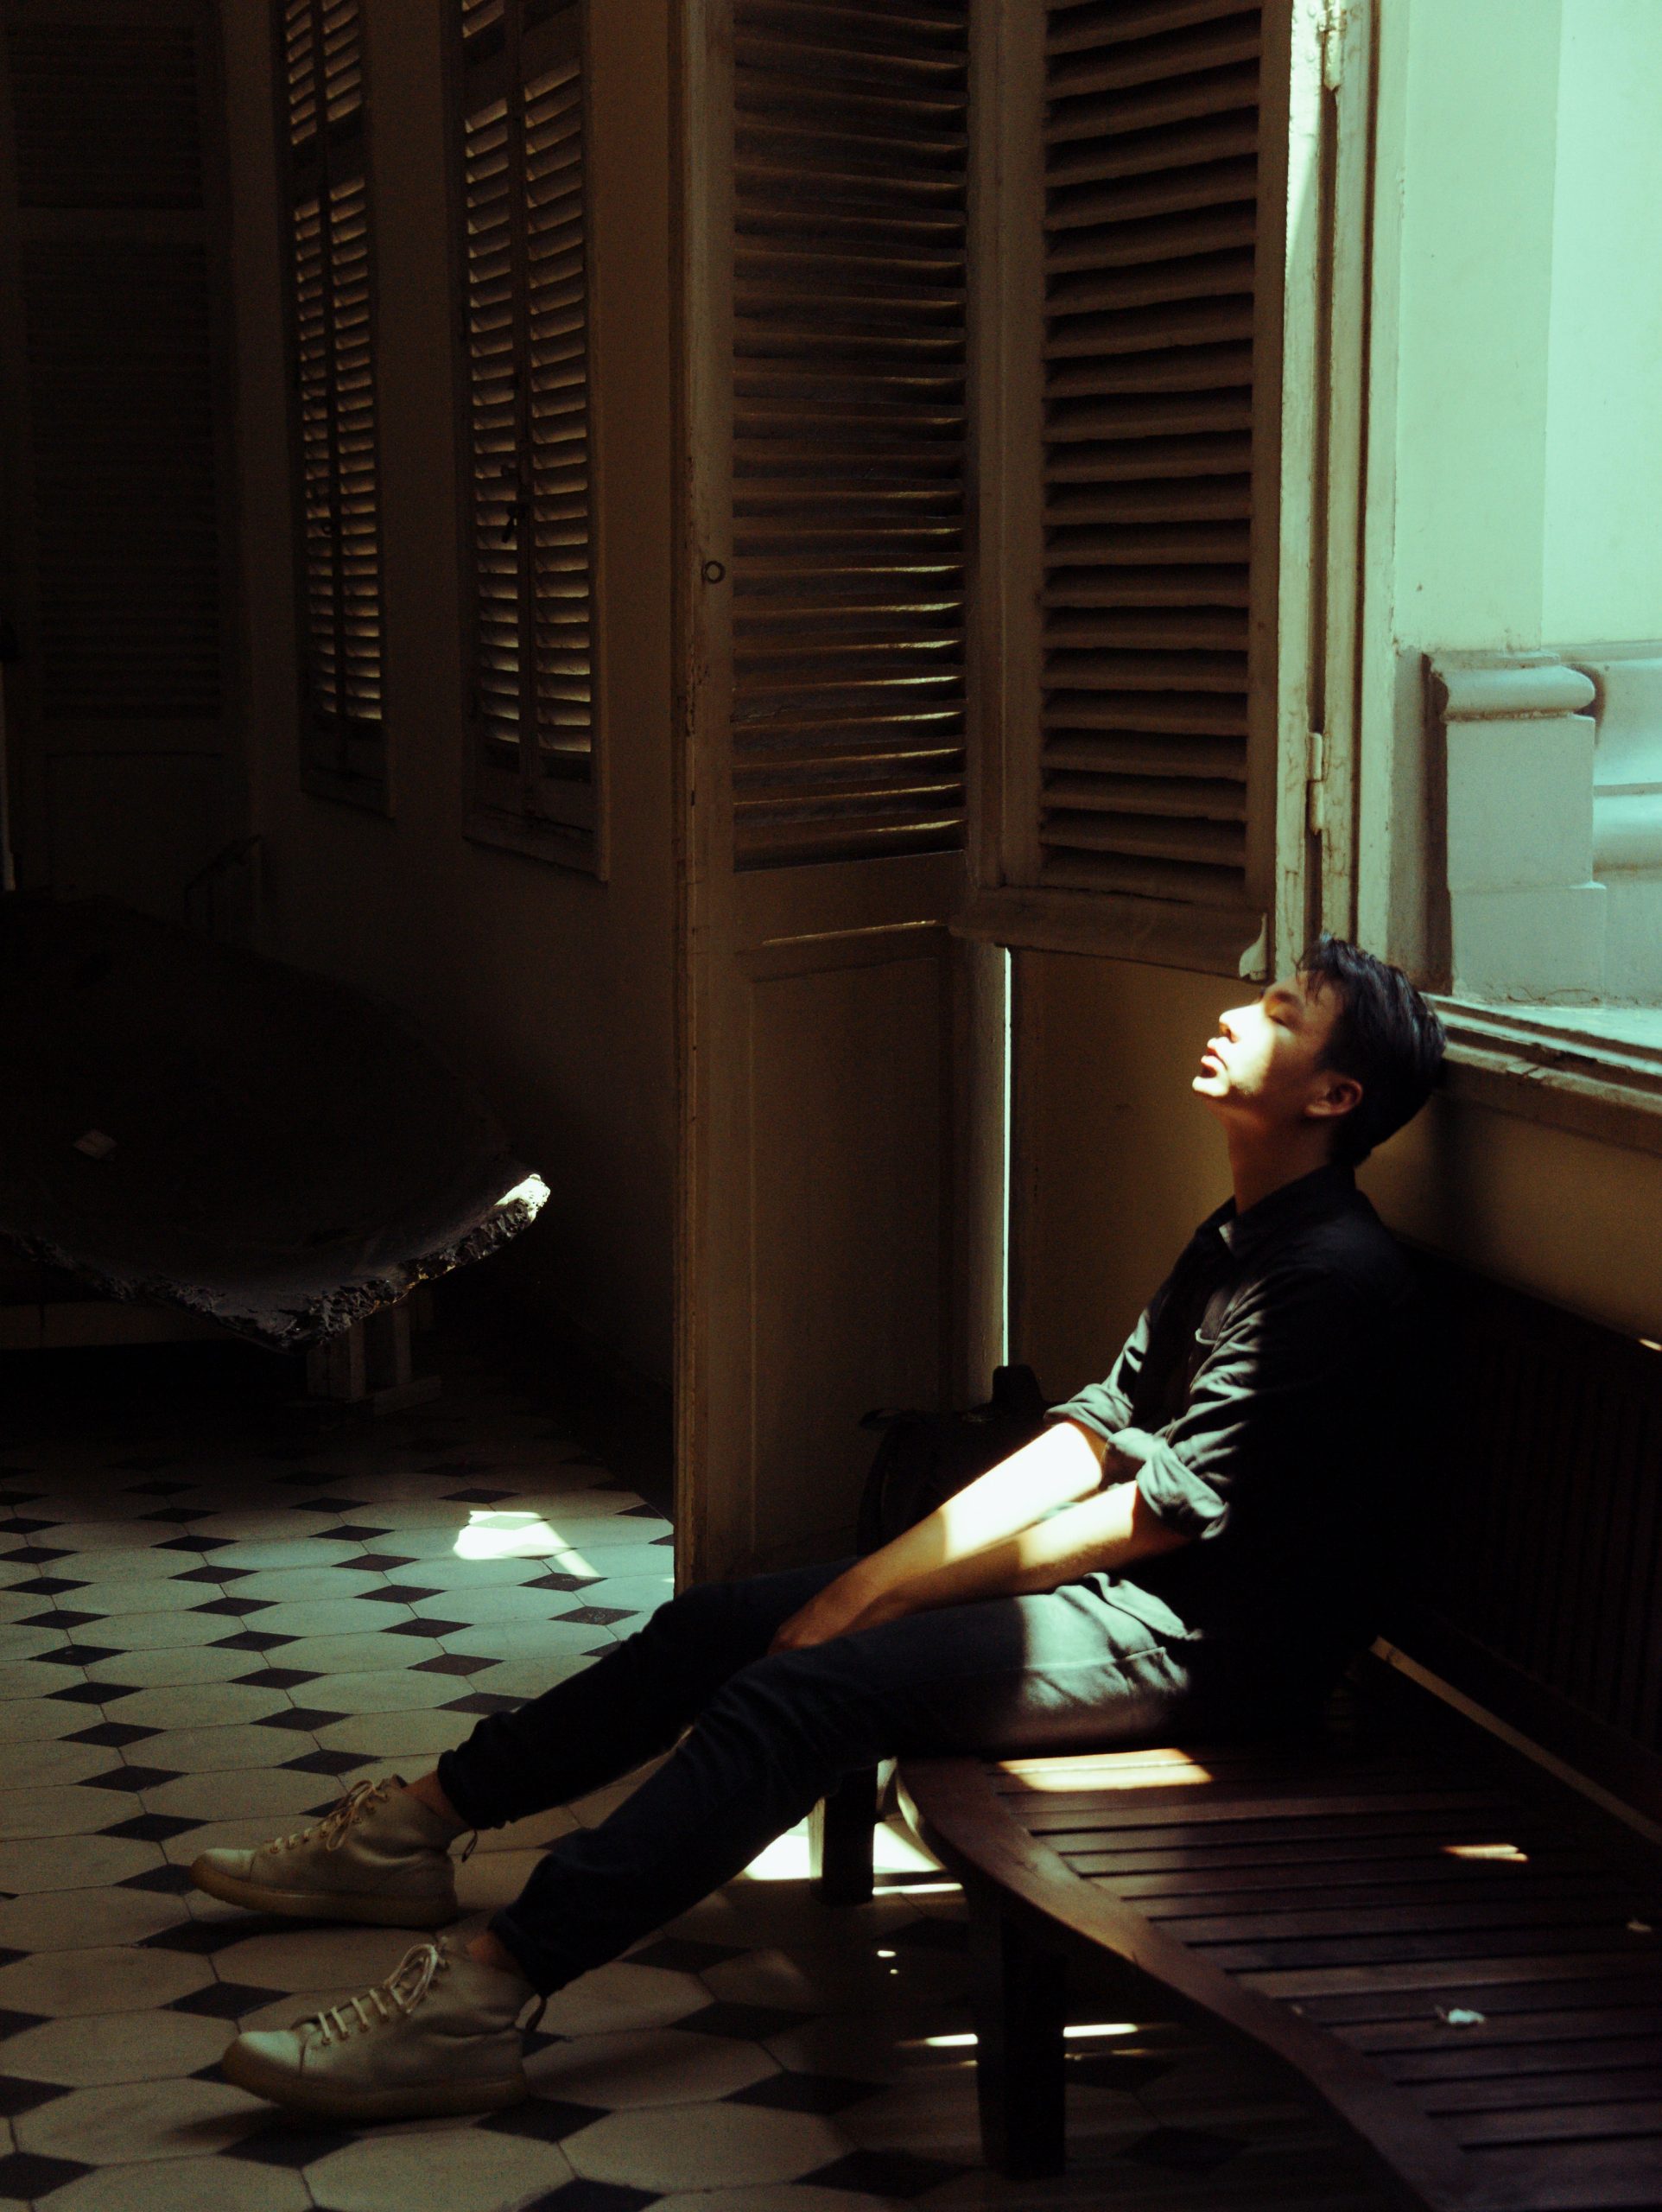 a young man sits on a bench in a dark room, with light slanting across his face.